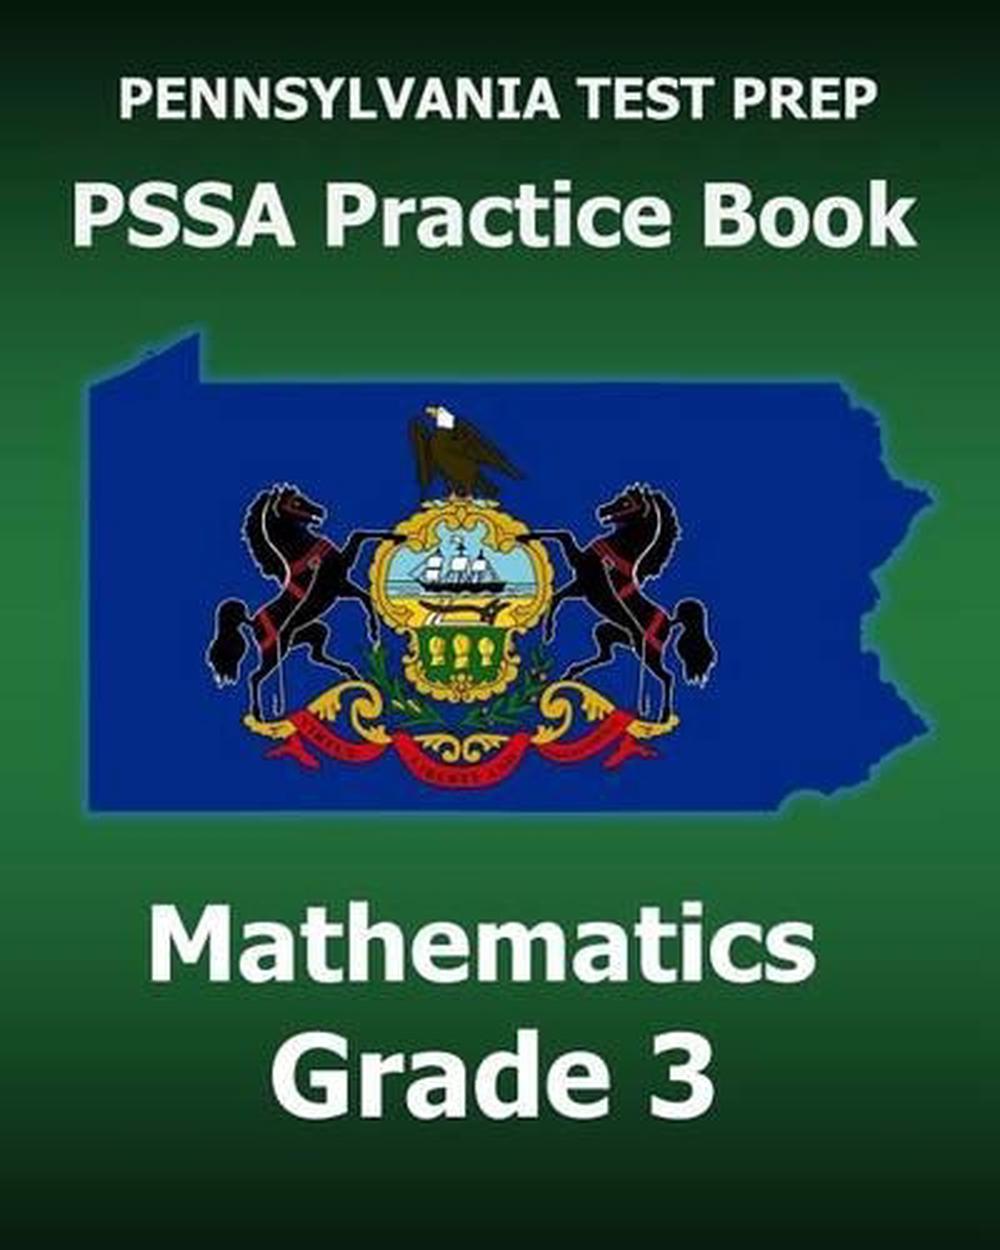 3rd-grade-pssa-math-workbook-2018-the-most-comprehensive-review-for-the-math-section-of-the